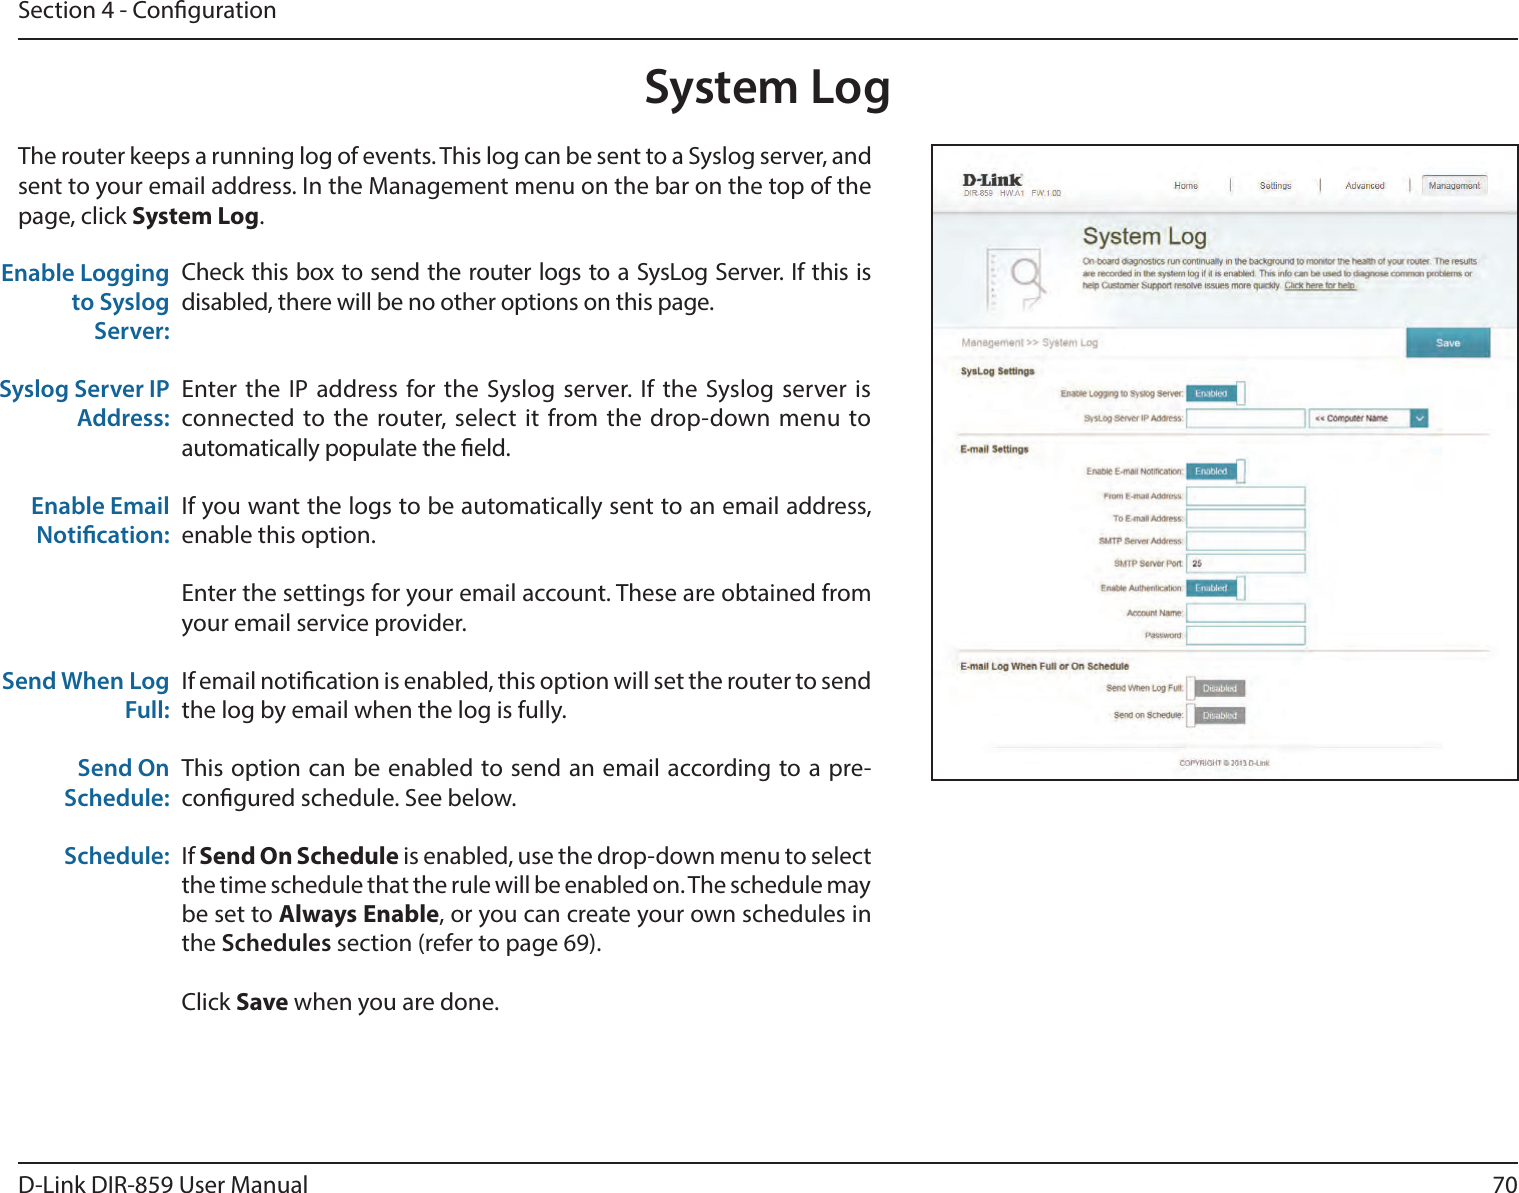 70D-Link DIR-859 User ManualSection 4 - CongurationSystem LogCheck this box to send the router logs to a SysLog Server. If this is disabled, there will be no other options on this page.Enter the IP address for the Syslog server. If the Syslog server is connected to the router, select it from the drop-down menu to automatically populate the eld. If you want the logs to be automatically sent to an email address, enable this option.Enter the settings for your email account. These are obtained from your email service provider.If email notication is enabled, this option will set the router to send the log by email when the log is fully.This option can be enabled to send an email according to a pre-congured schedule. See below.If Send On Schedule is enabled, use the drop-down menu to select the time schedule that the rule will be enabled on. The schedule may be set to Always Enable, or you can create your own schedules in the Schedules section (refer to page 69).Click Save when you are done.Enable Logging to Syslog Server:Syslog Server IP Address:Enable Email Notication:Send When Log Full:Send On Schedule:Schedule:The router keeps a running log of events. This log can be sent to a Syslog server, and sent to your email address. In the Management menu on the bar on the top of the page, click System Log. 